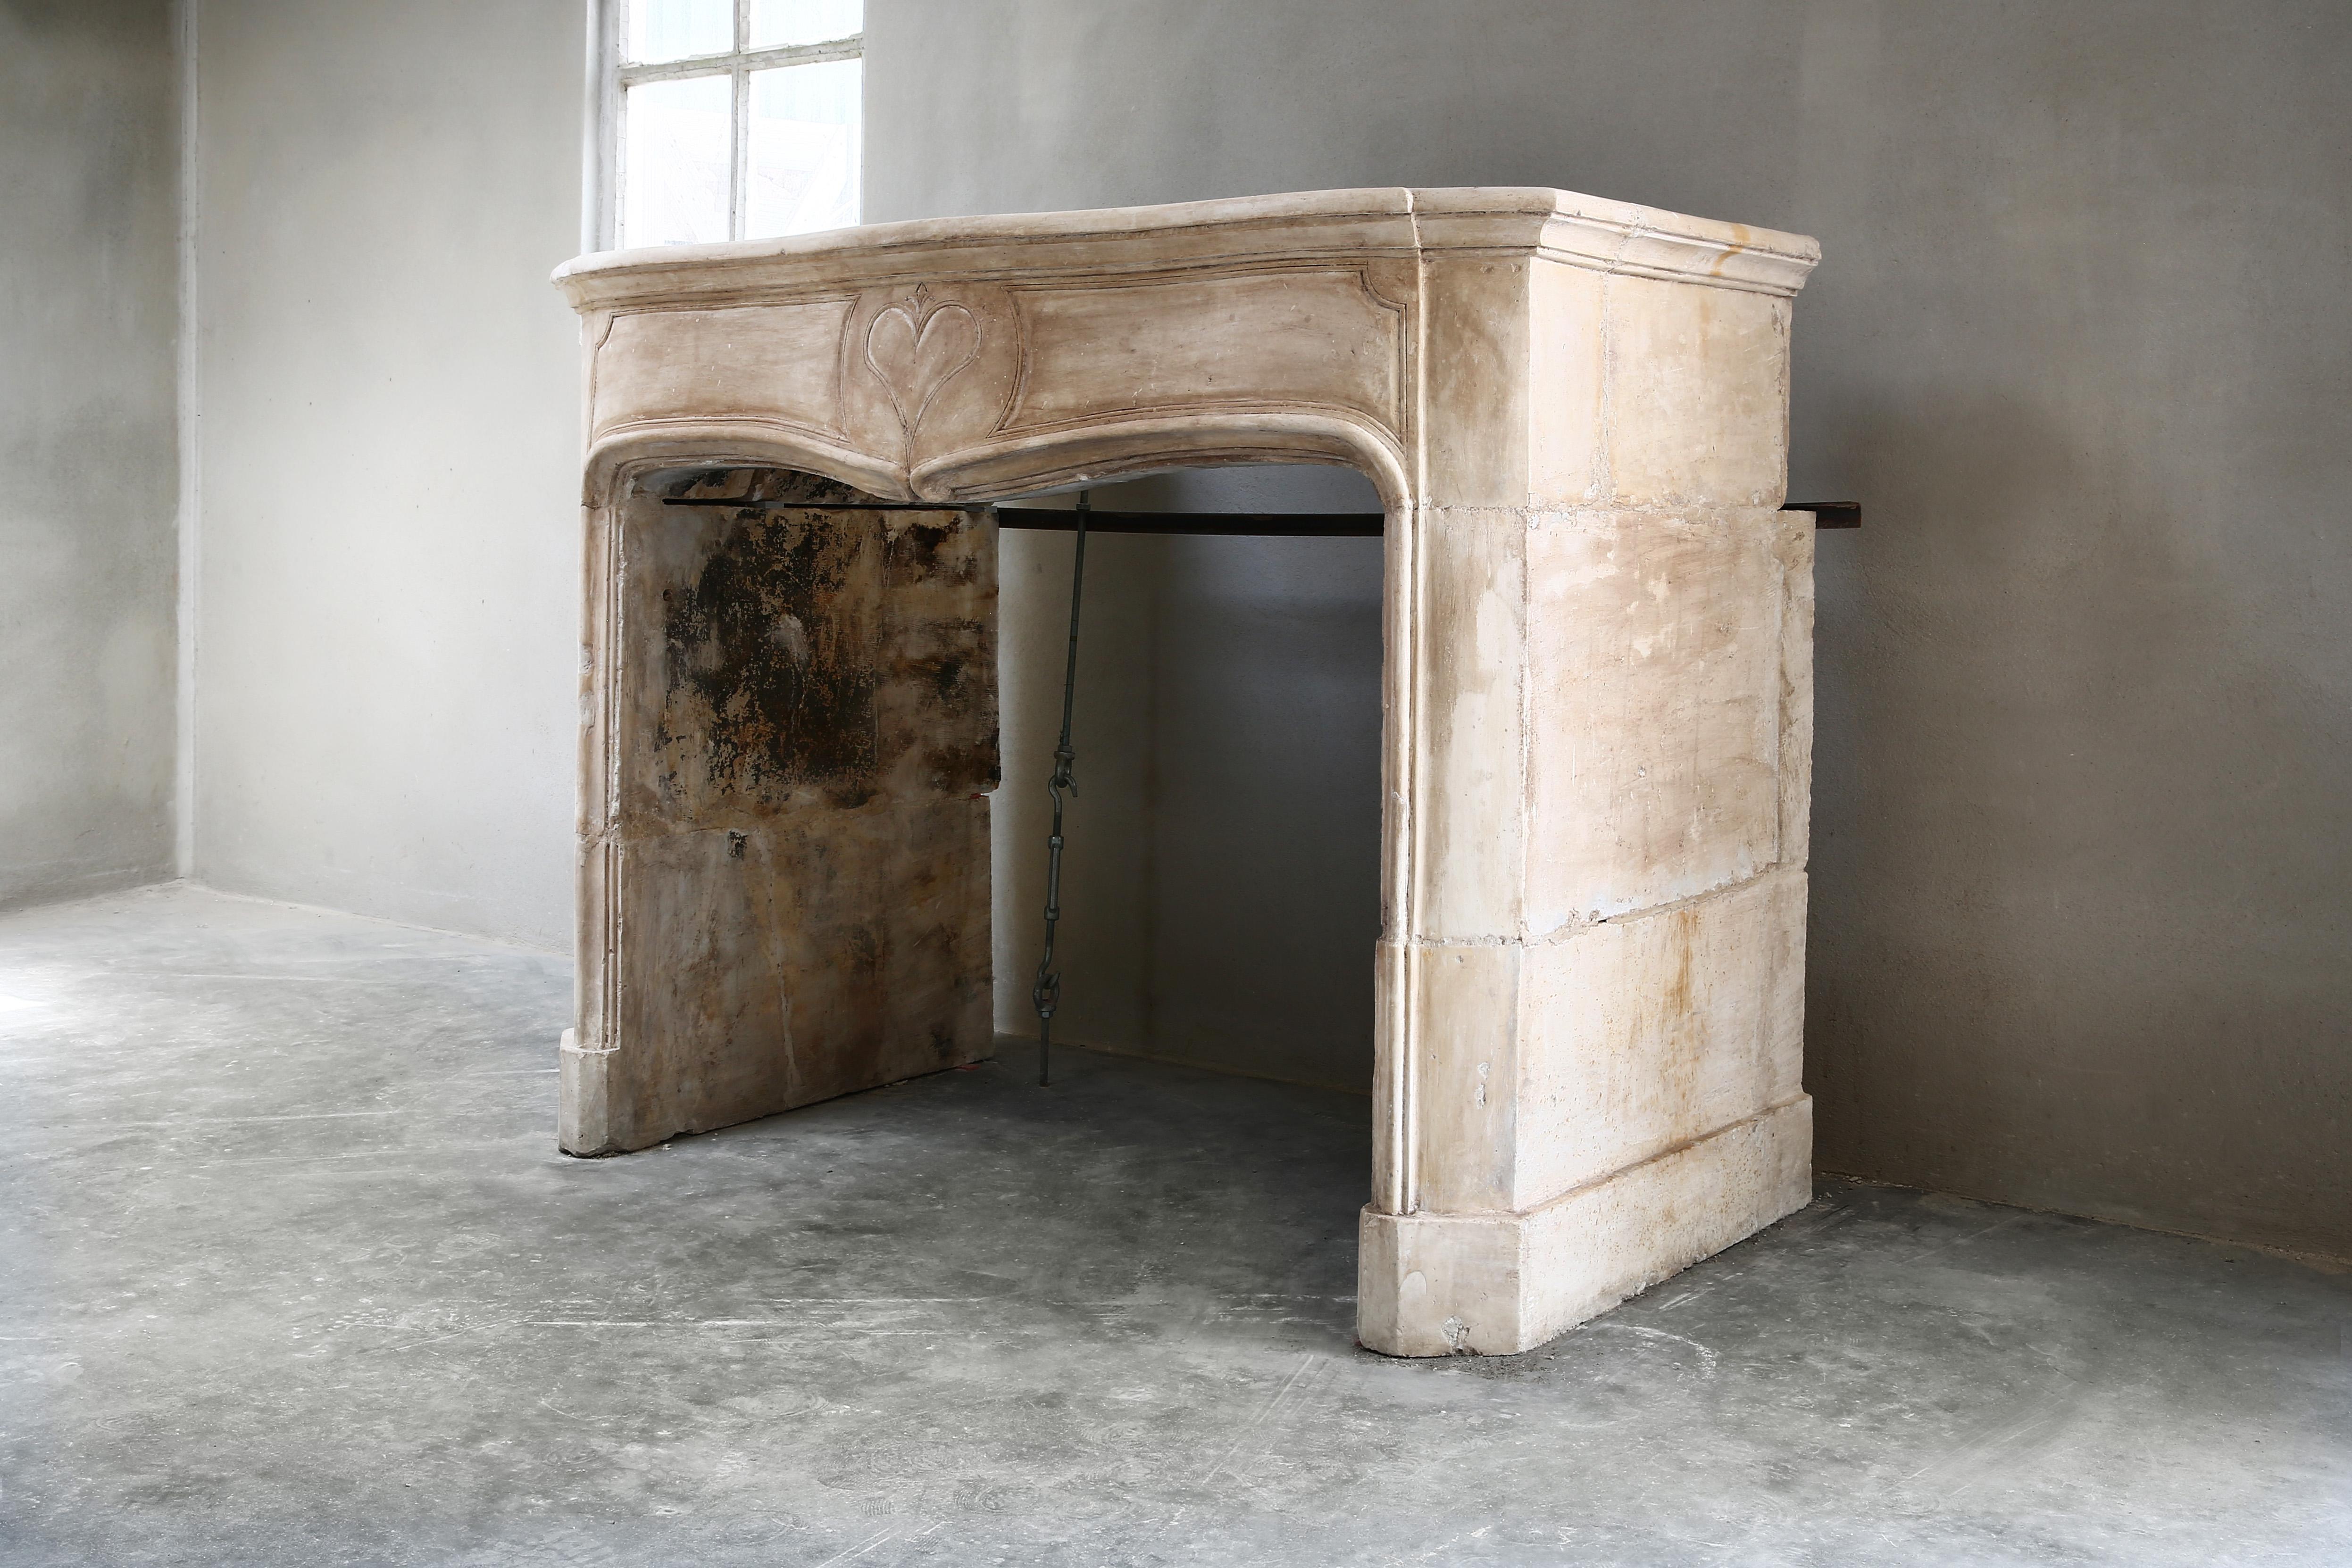 Antique French fireplace of limestone from the 19th century! The front part has an ornament in the shape of a heart that we do not often encounter with antique fireplaces. The antique fireplace has a beautiful neutral color that is well applicable